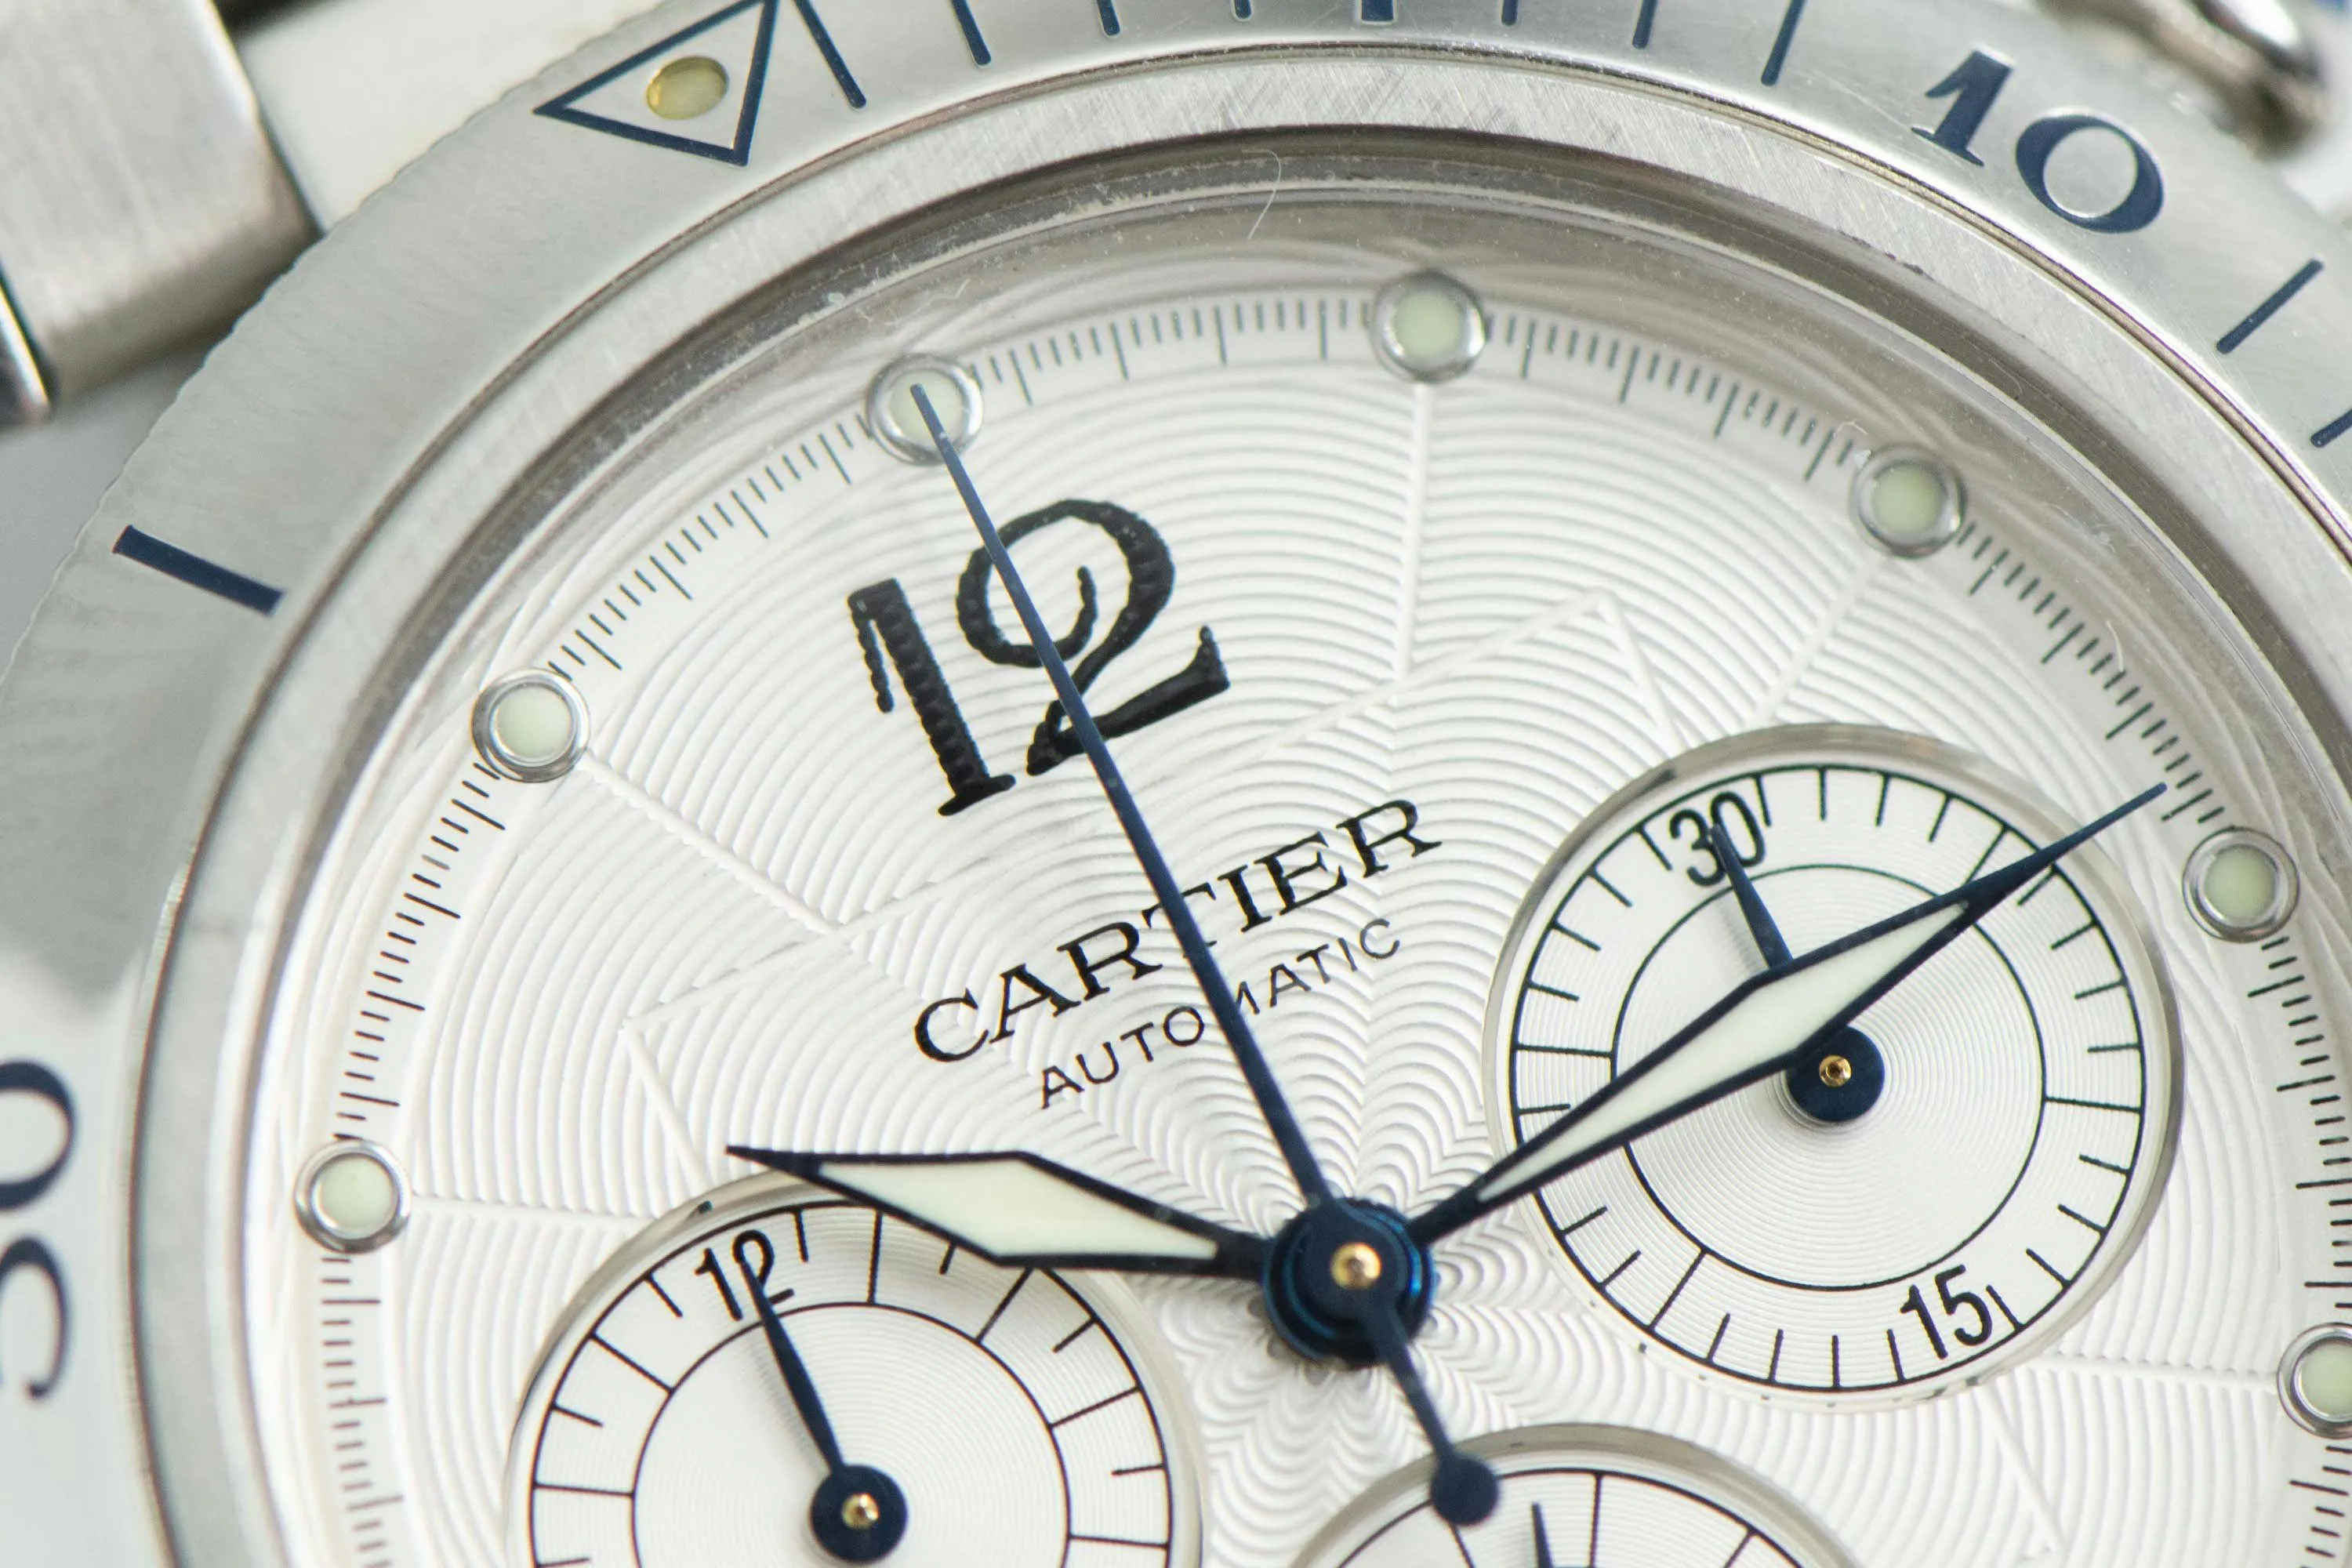 Cartier Pasha Seatimer w31030H3 38mm Stainless steel Silver 6